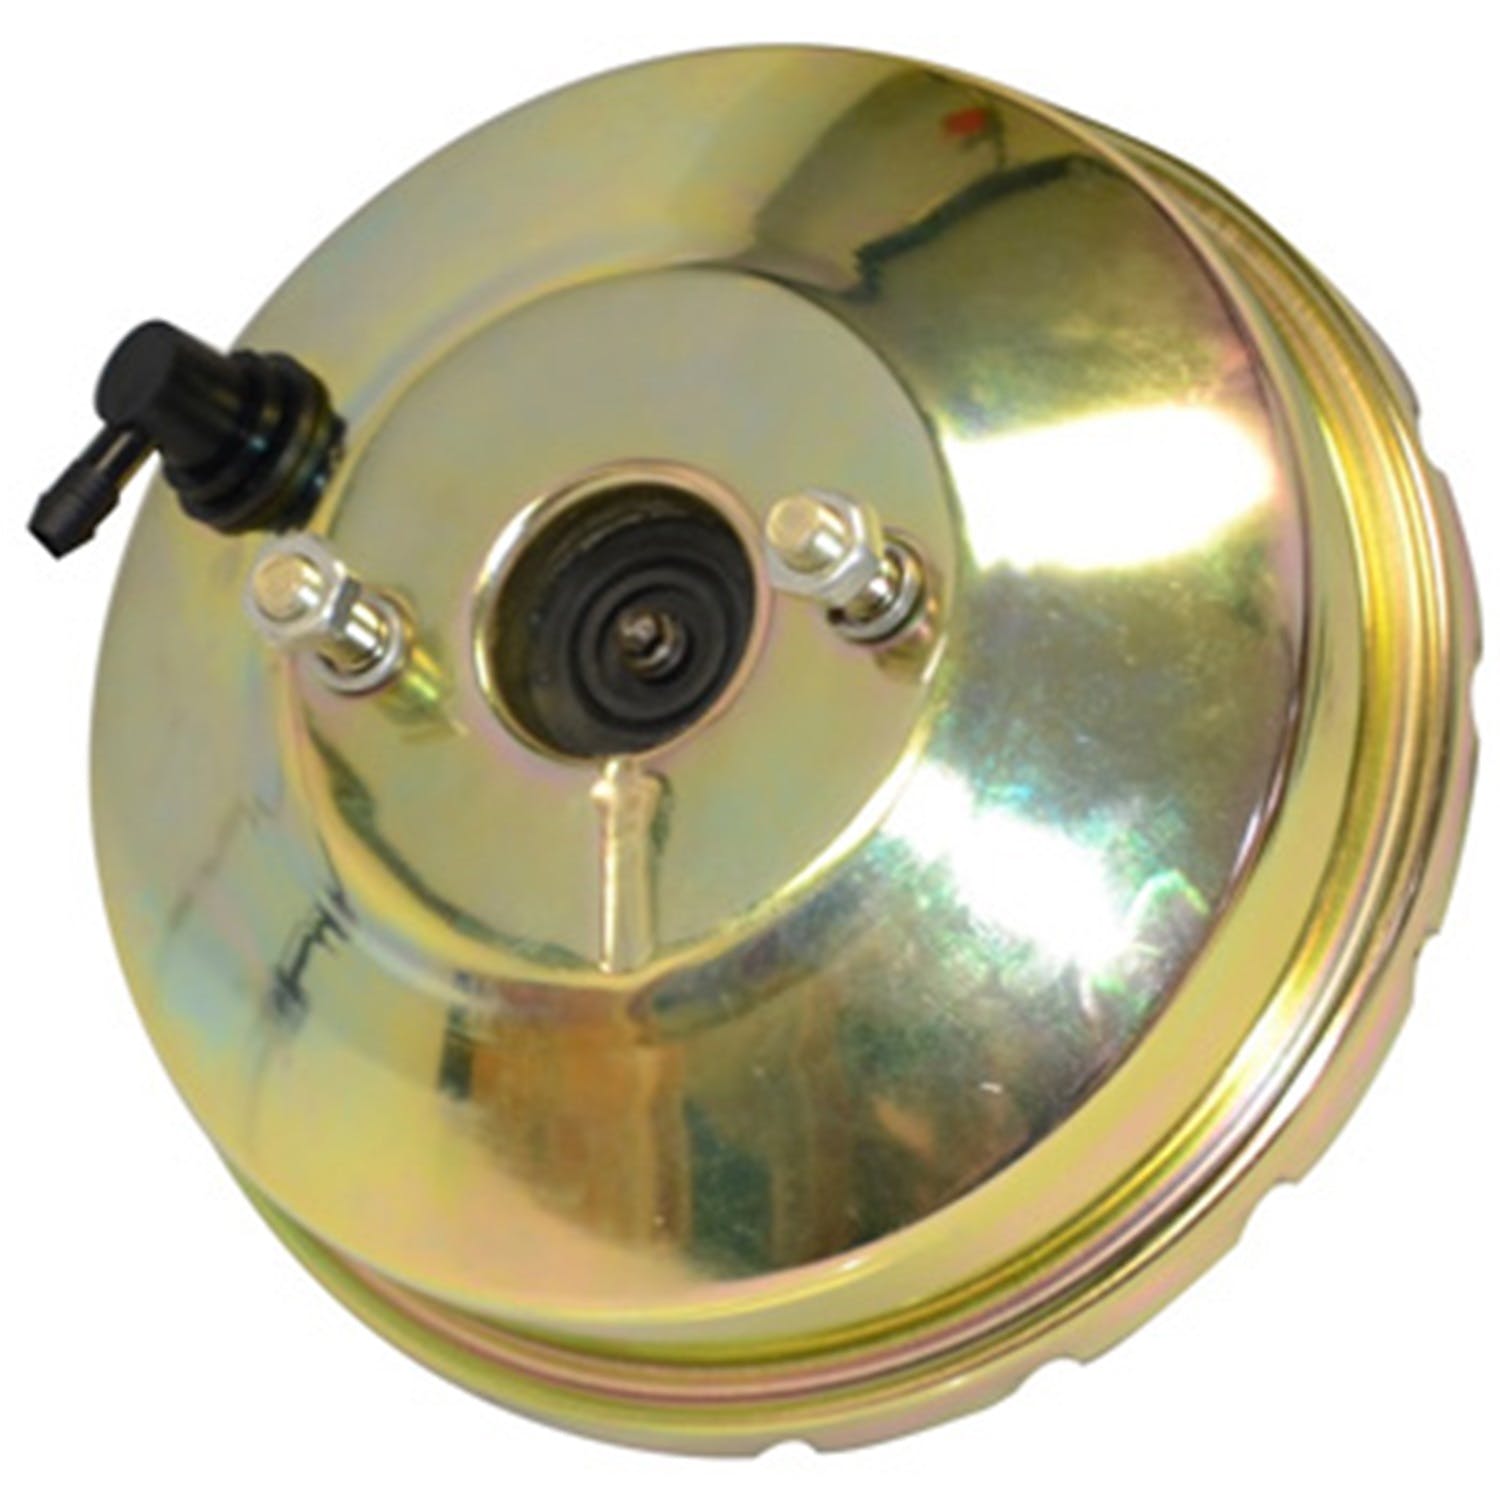 Stainless Steel Brakes 28138 9in. booster only